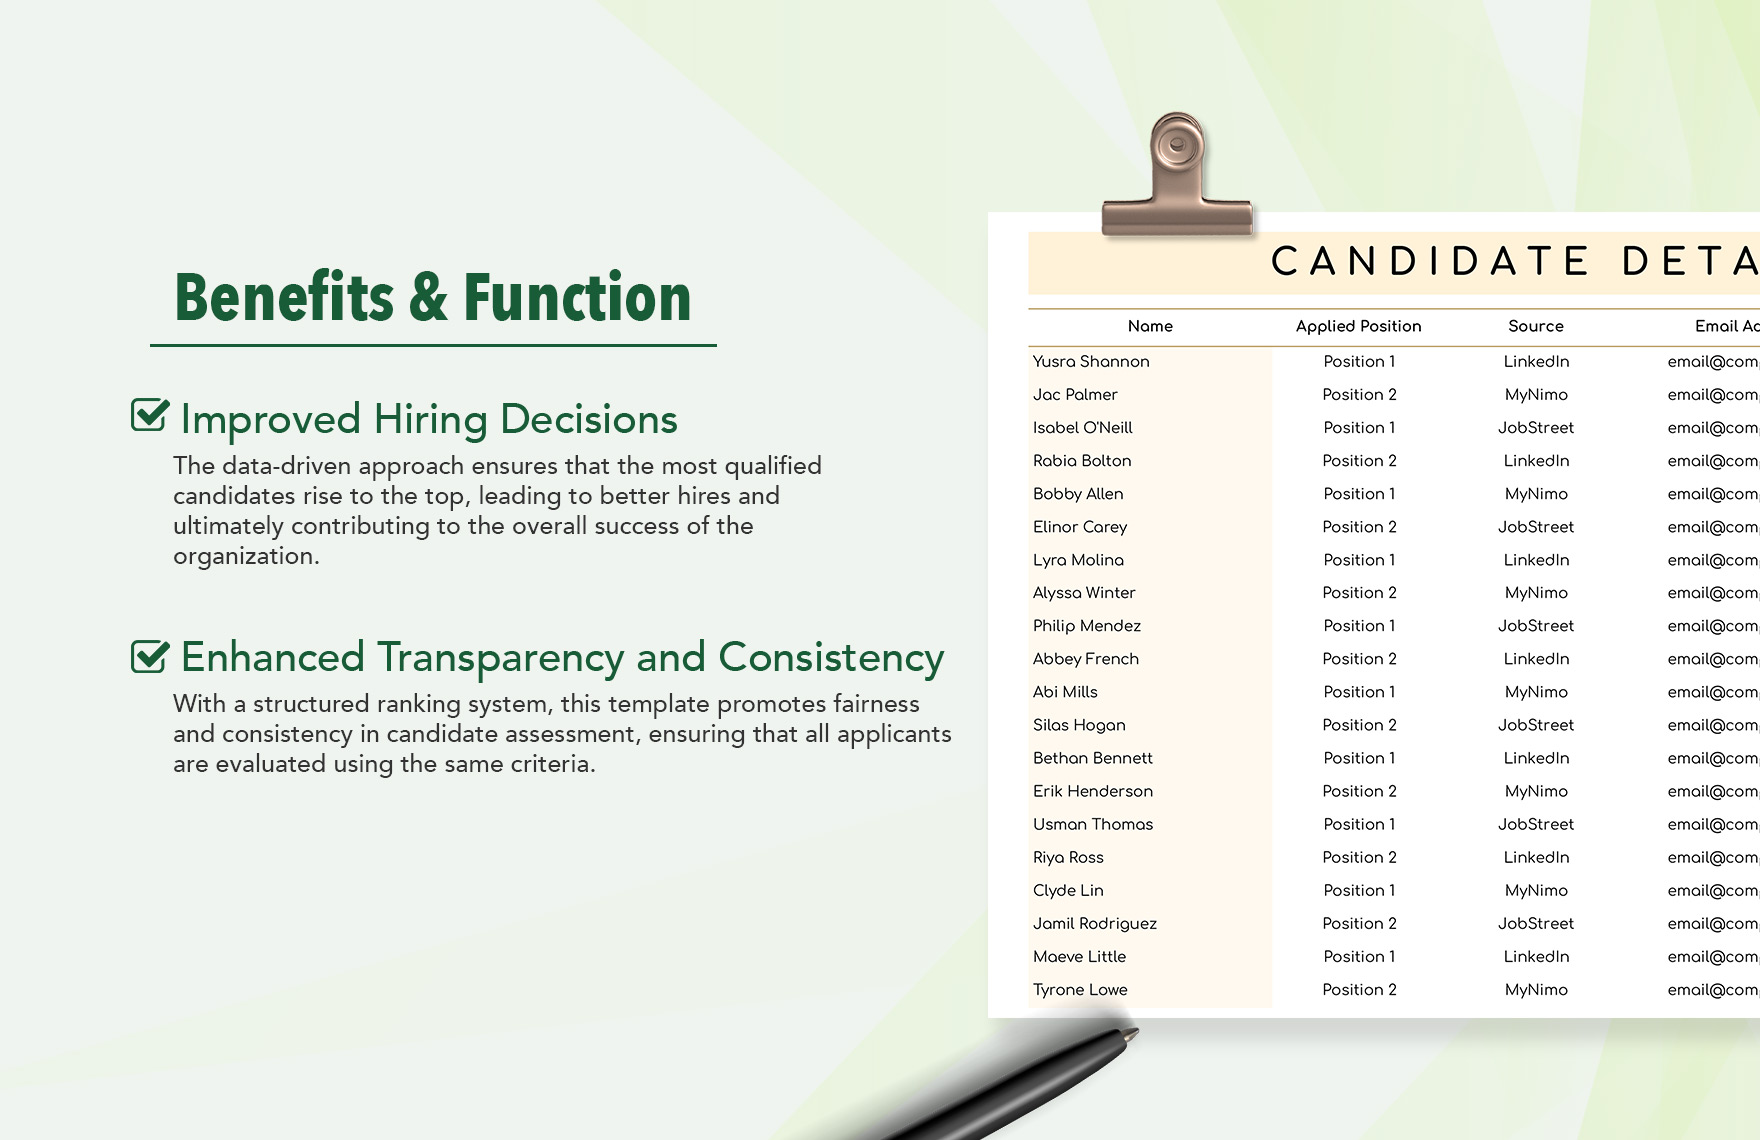 Candidate Ranking Based on Test Results HR Template